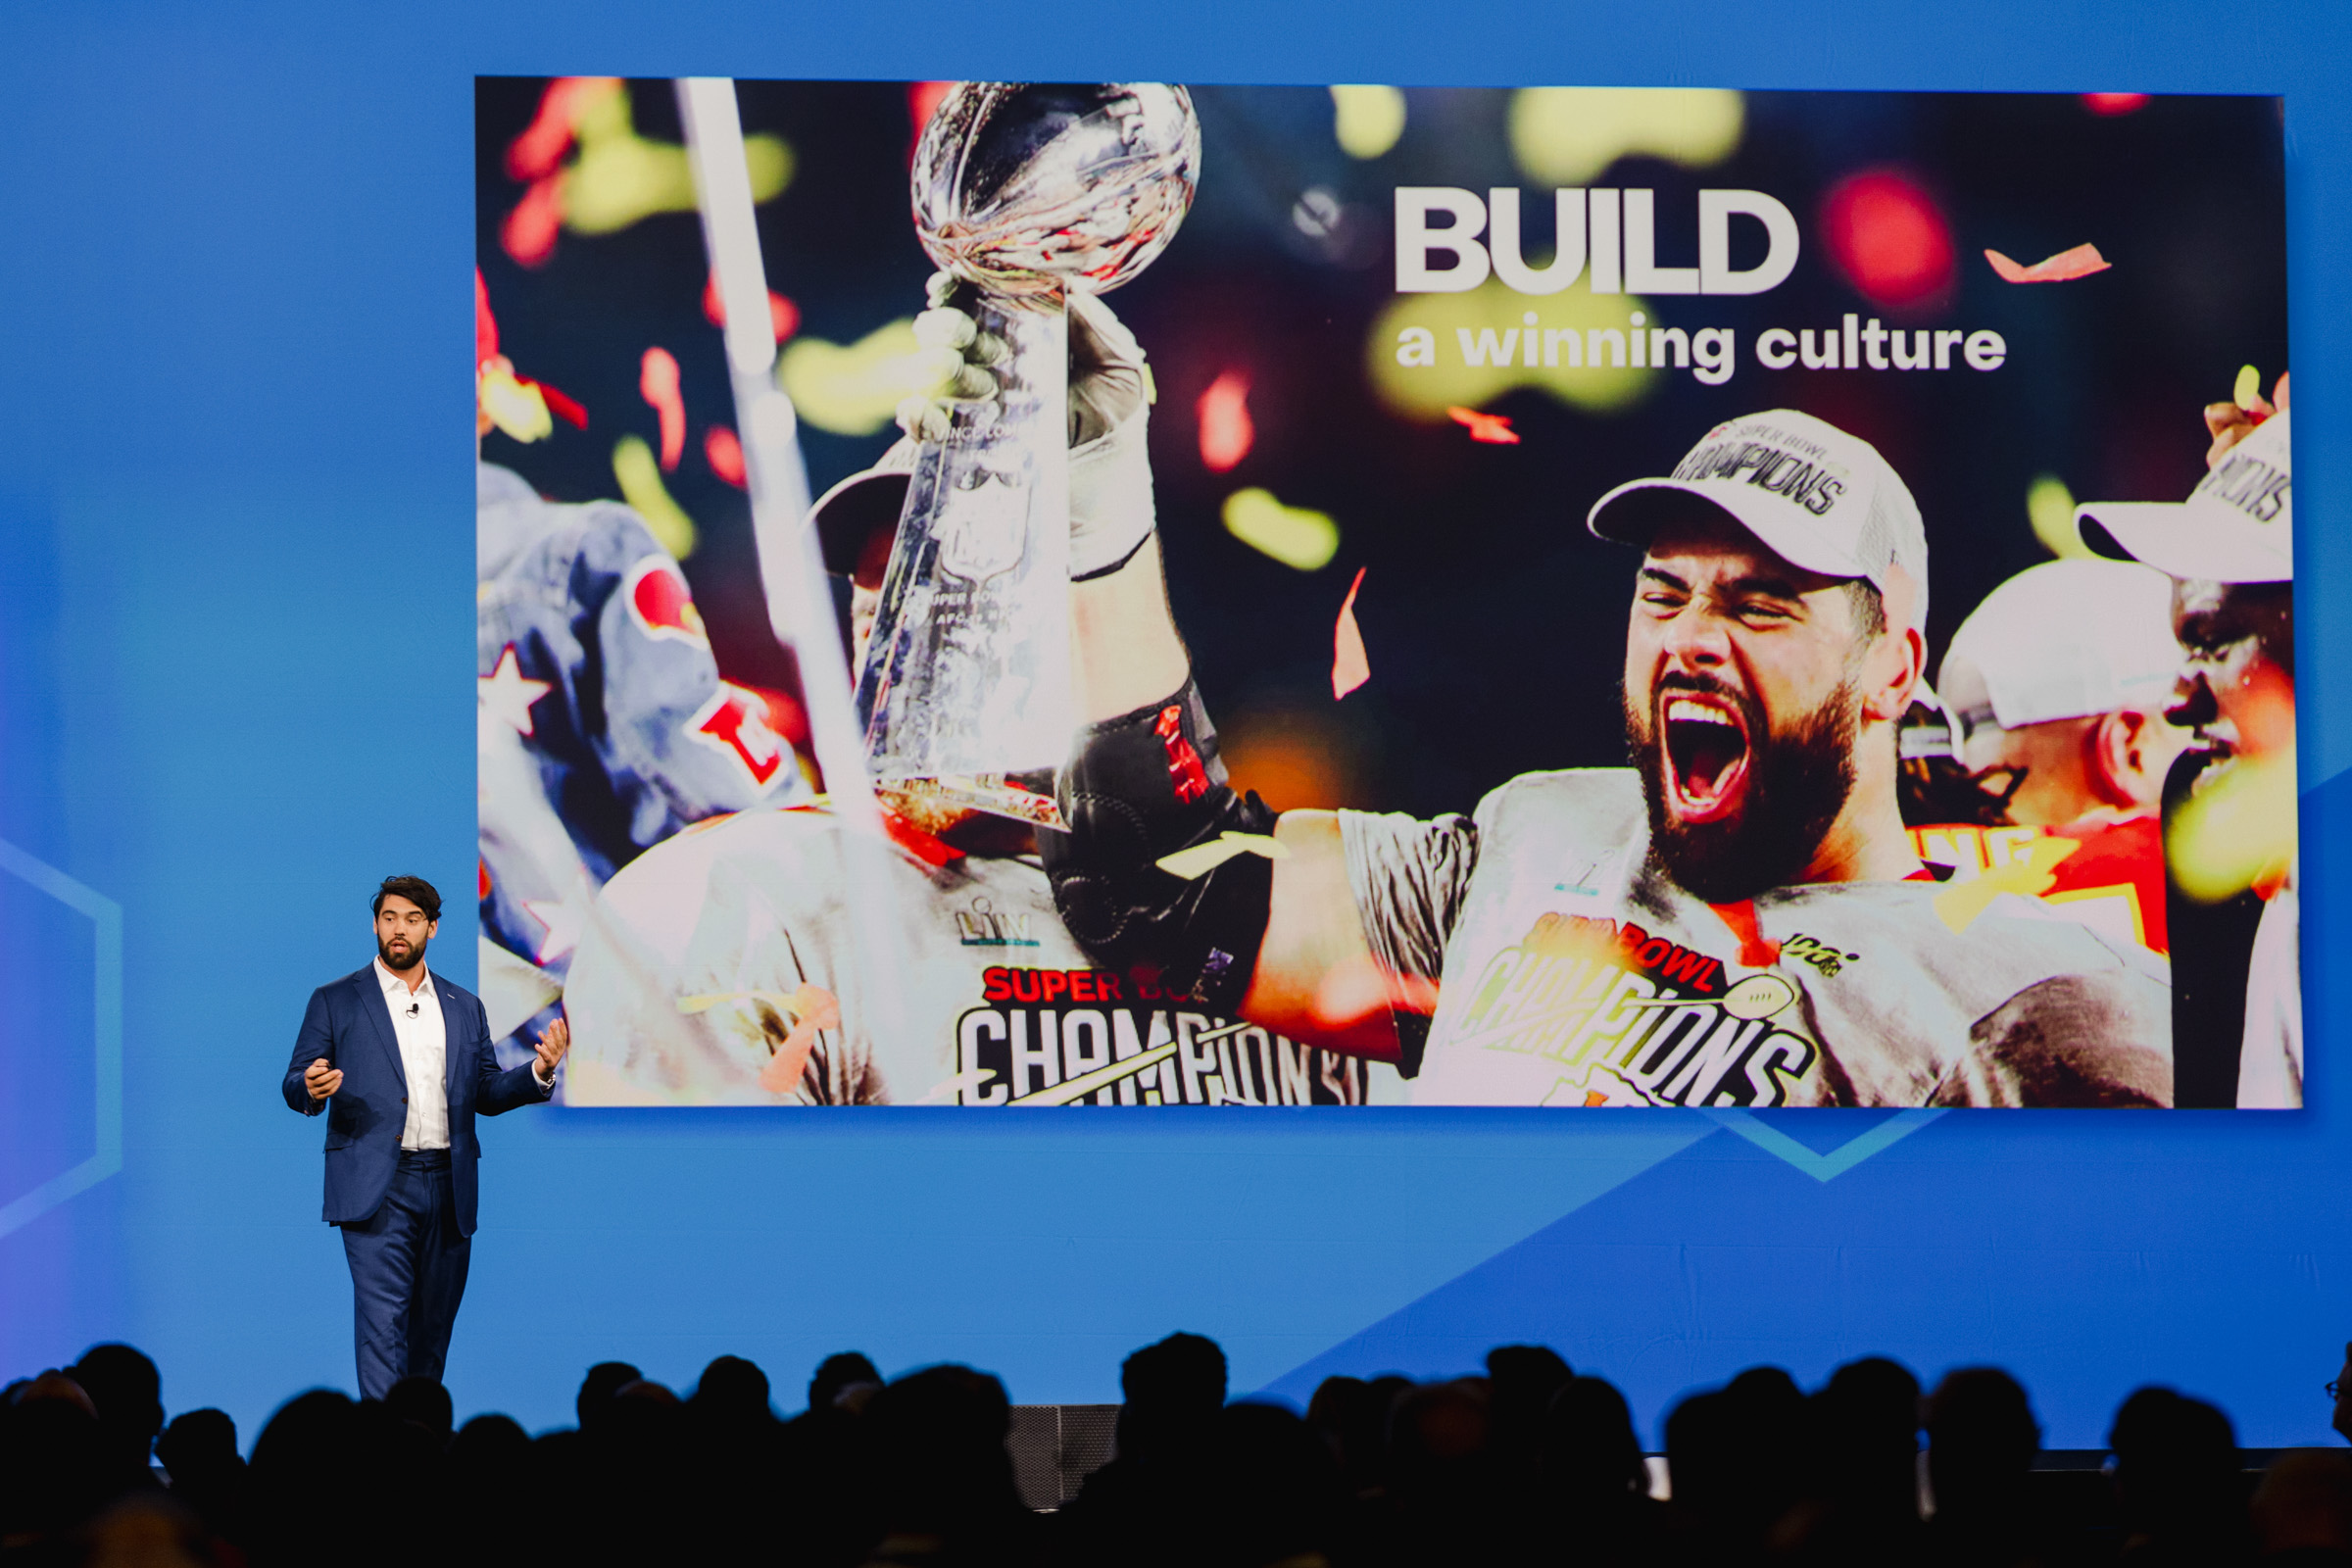 A speaker presents on stage, with event photography capturing a large screen behind them showing a football player celebrating, holding a trophy. The screen reads "BUILD a winning culture." Audience members are visible in the foreground.